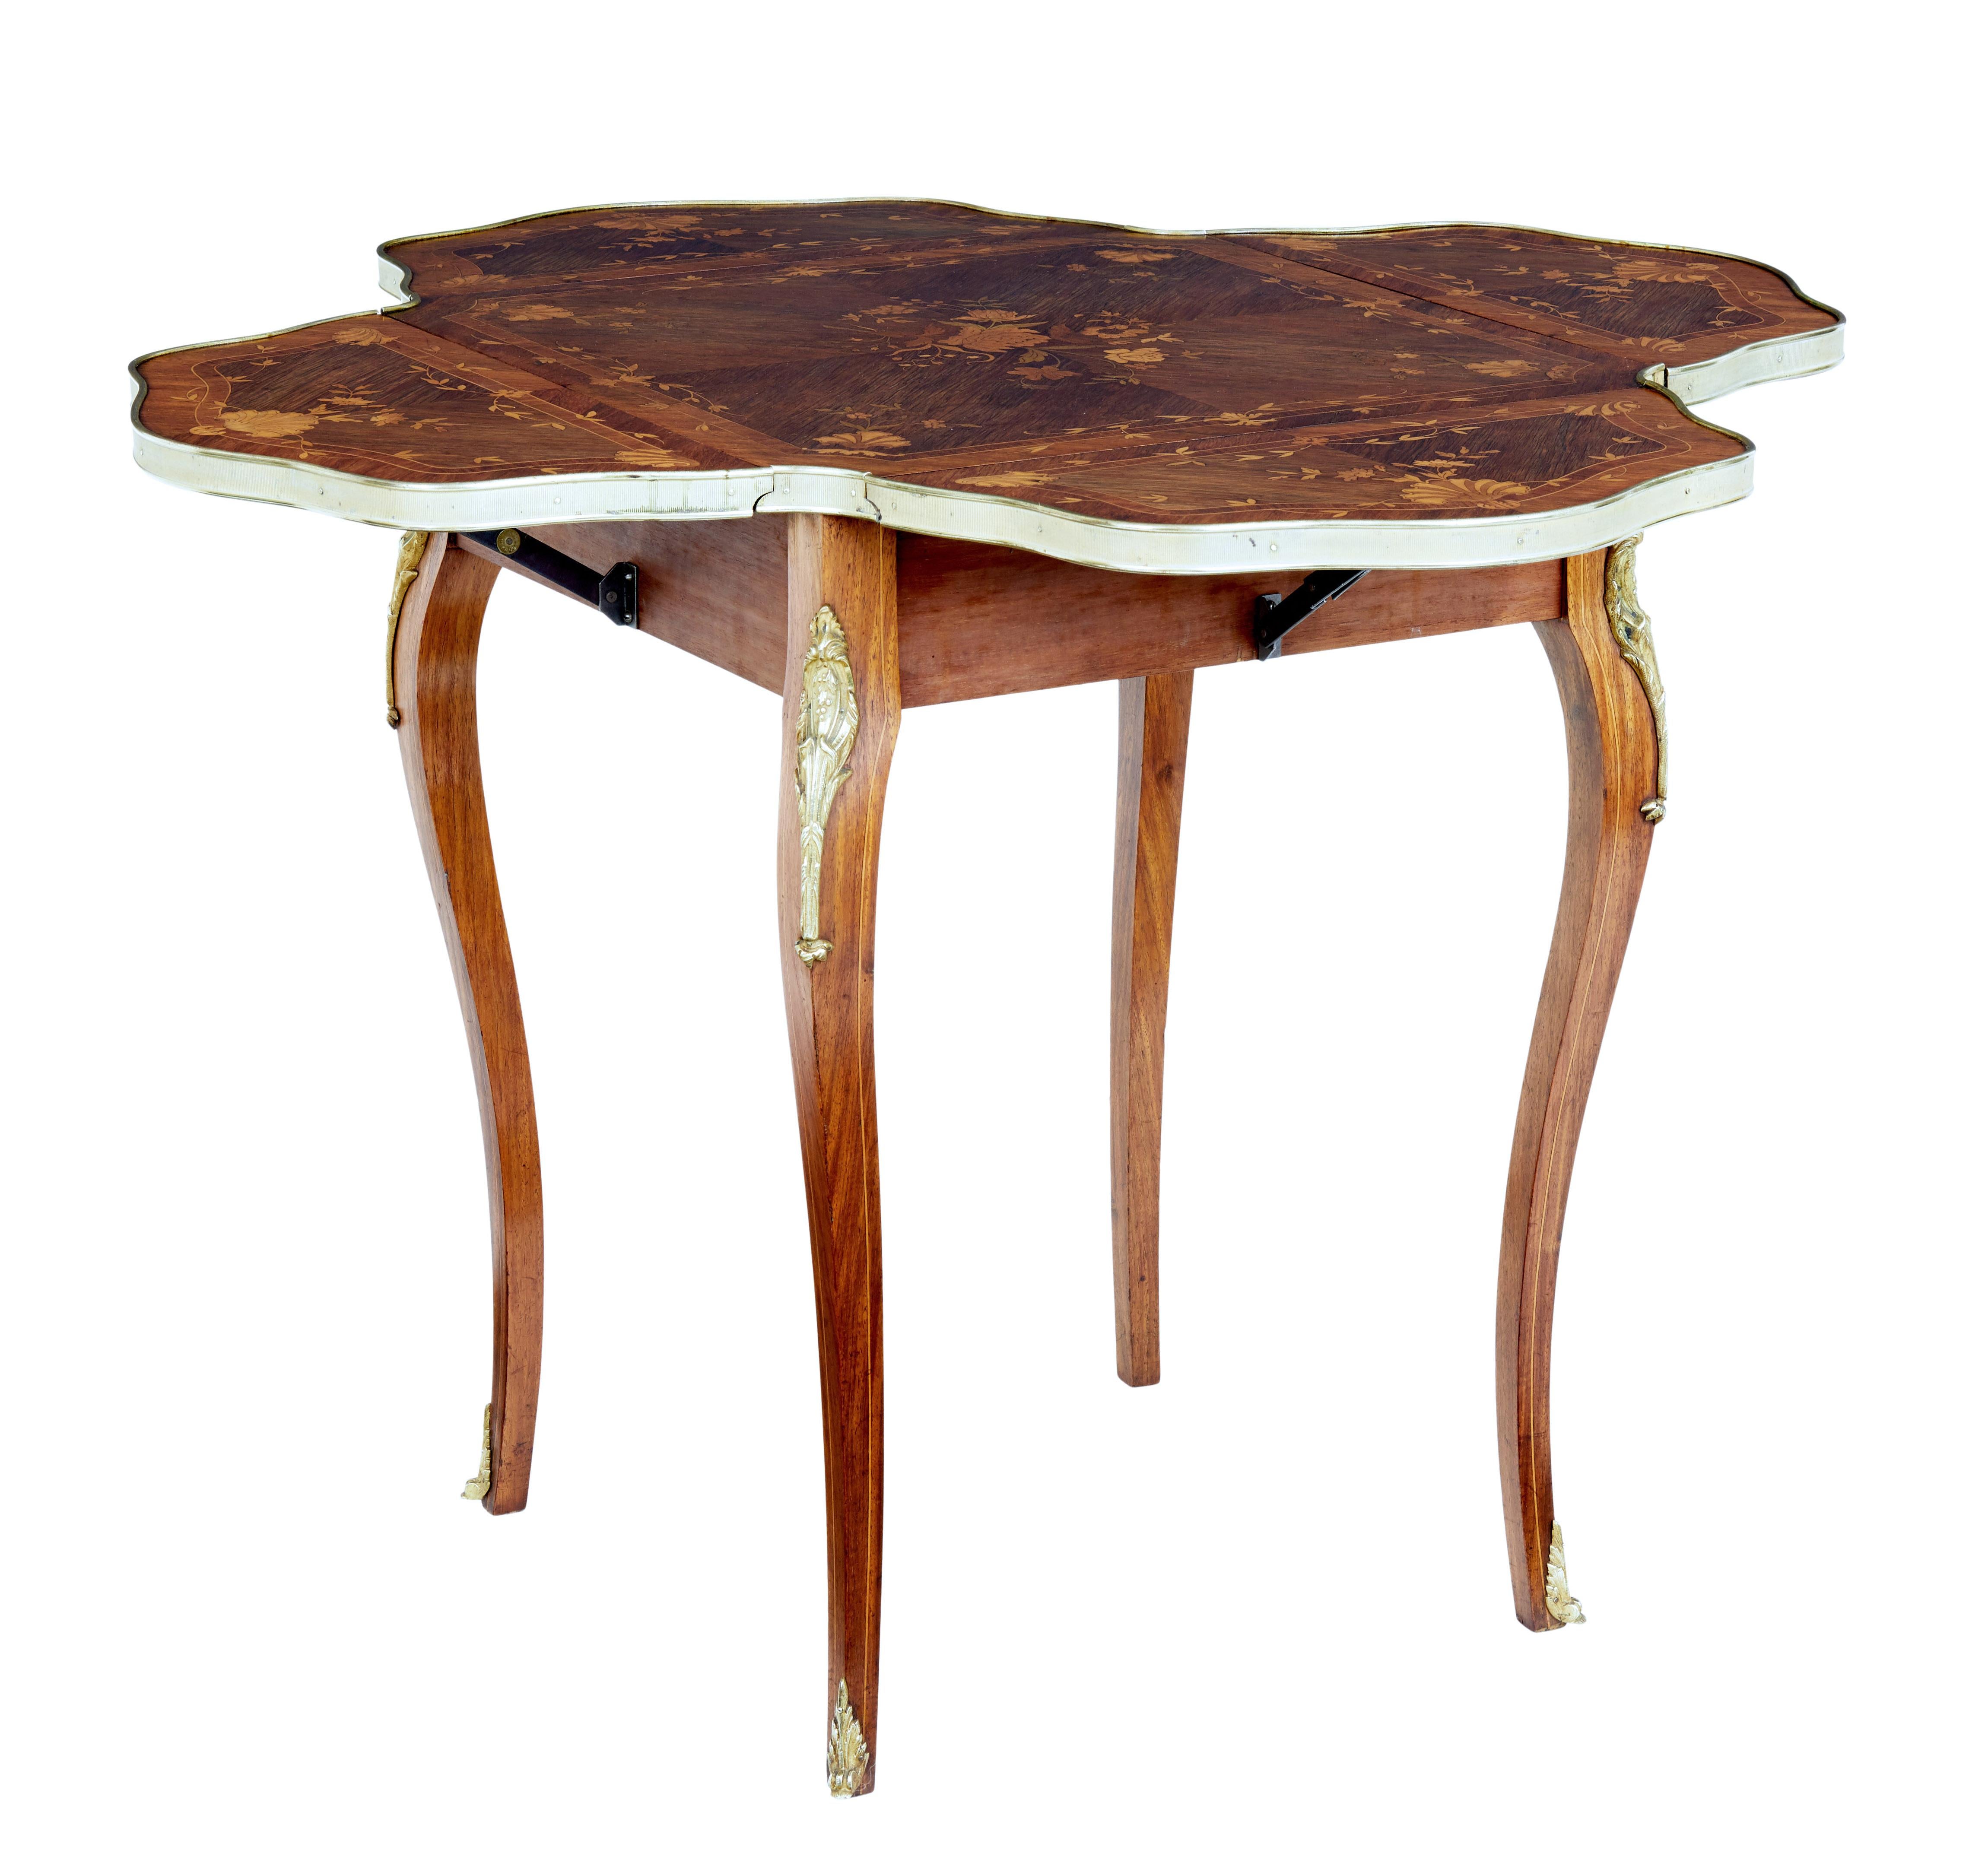 Good quality Victorian envelope occasional table, circa 1890.

Square top with 4 shaped drop down leaves on each corner, beautifully inlaid with palisander, satinwood and boxwood. Complete with strung borders. Top edge with machined brass border